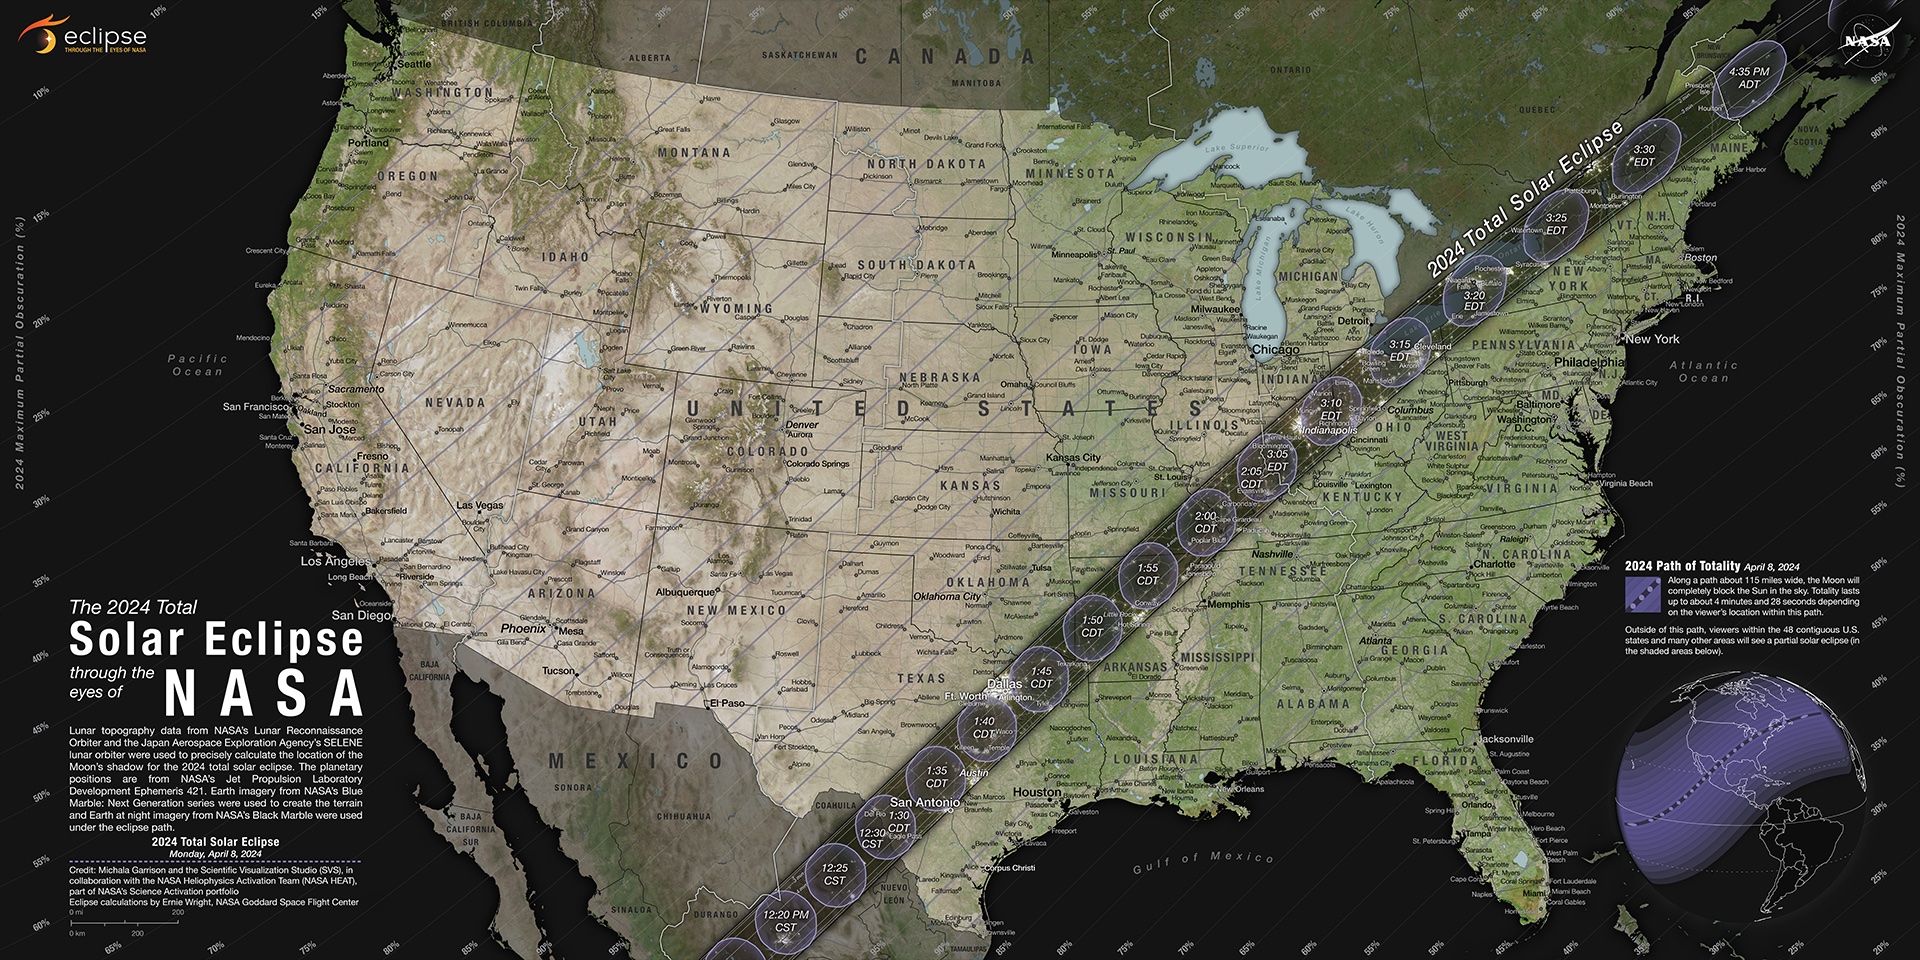 This is a map of the United States. A thick, shaded, grey line that represents the path of totality of the 2024 total eclipse cuts across the map. States in the path of totality include Texas, Oklahoma, Arkansas, Missouri, Illinois, Kentucky, Indiana, Ohio, Pennsylvania, New York, Vermont, New Hampshire, and Maine.